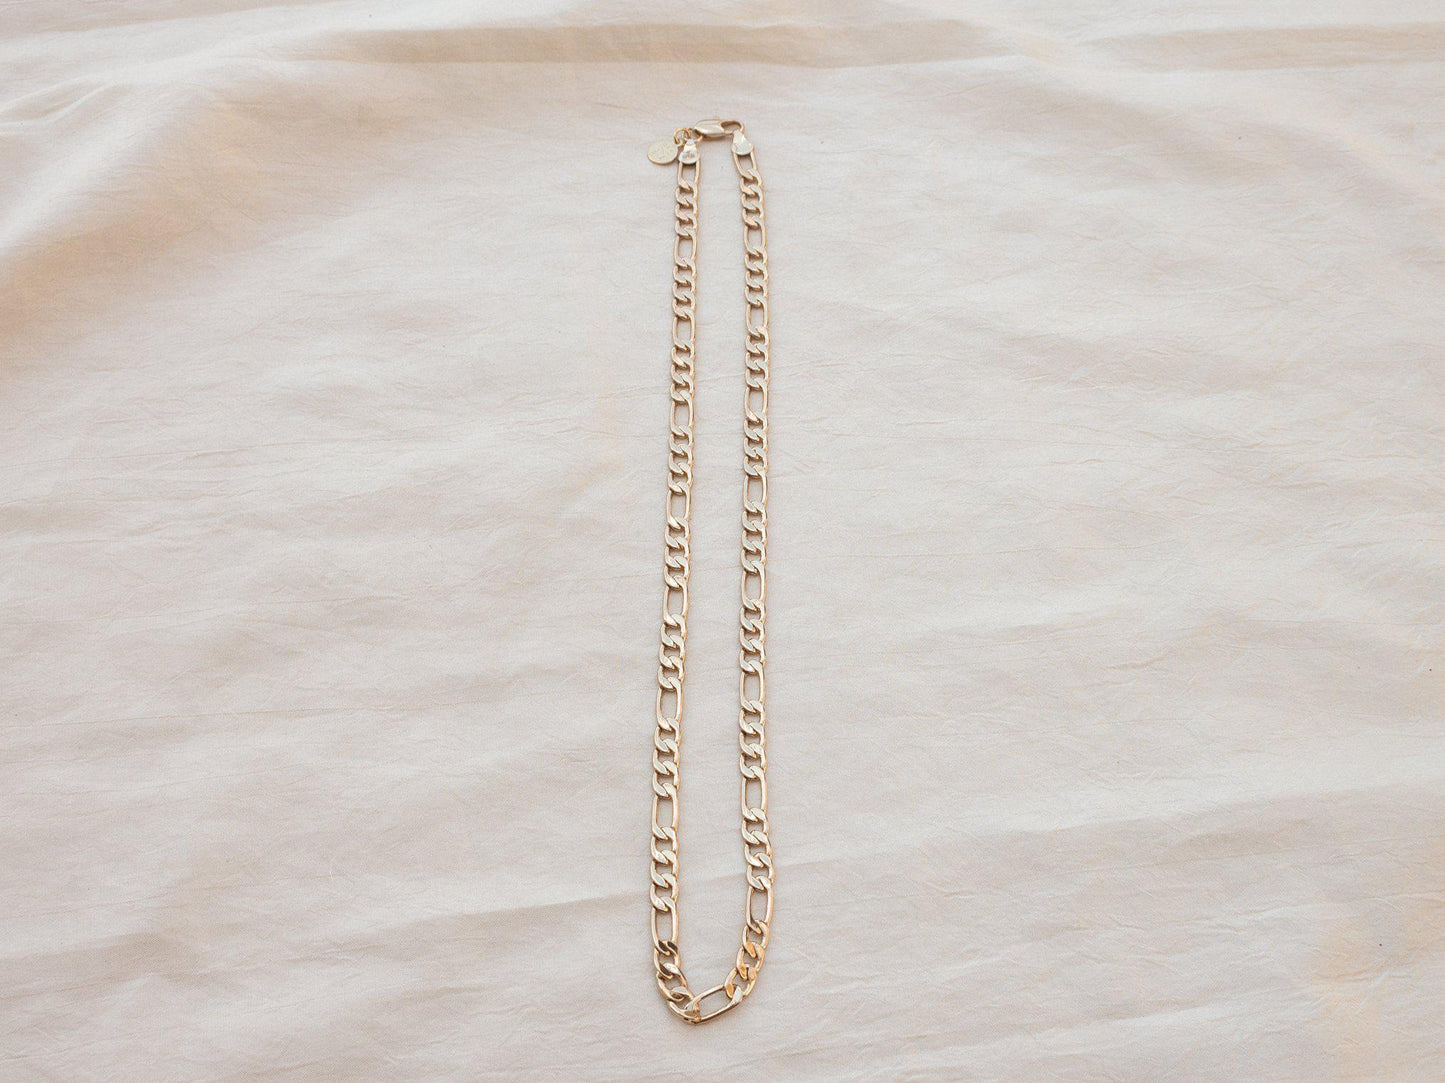 A luxurious thick and bold Figaro chain that looks great solo or layered. 20" long, gold fill. Designed and handmade in Downtown Los Angeles.